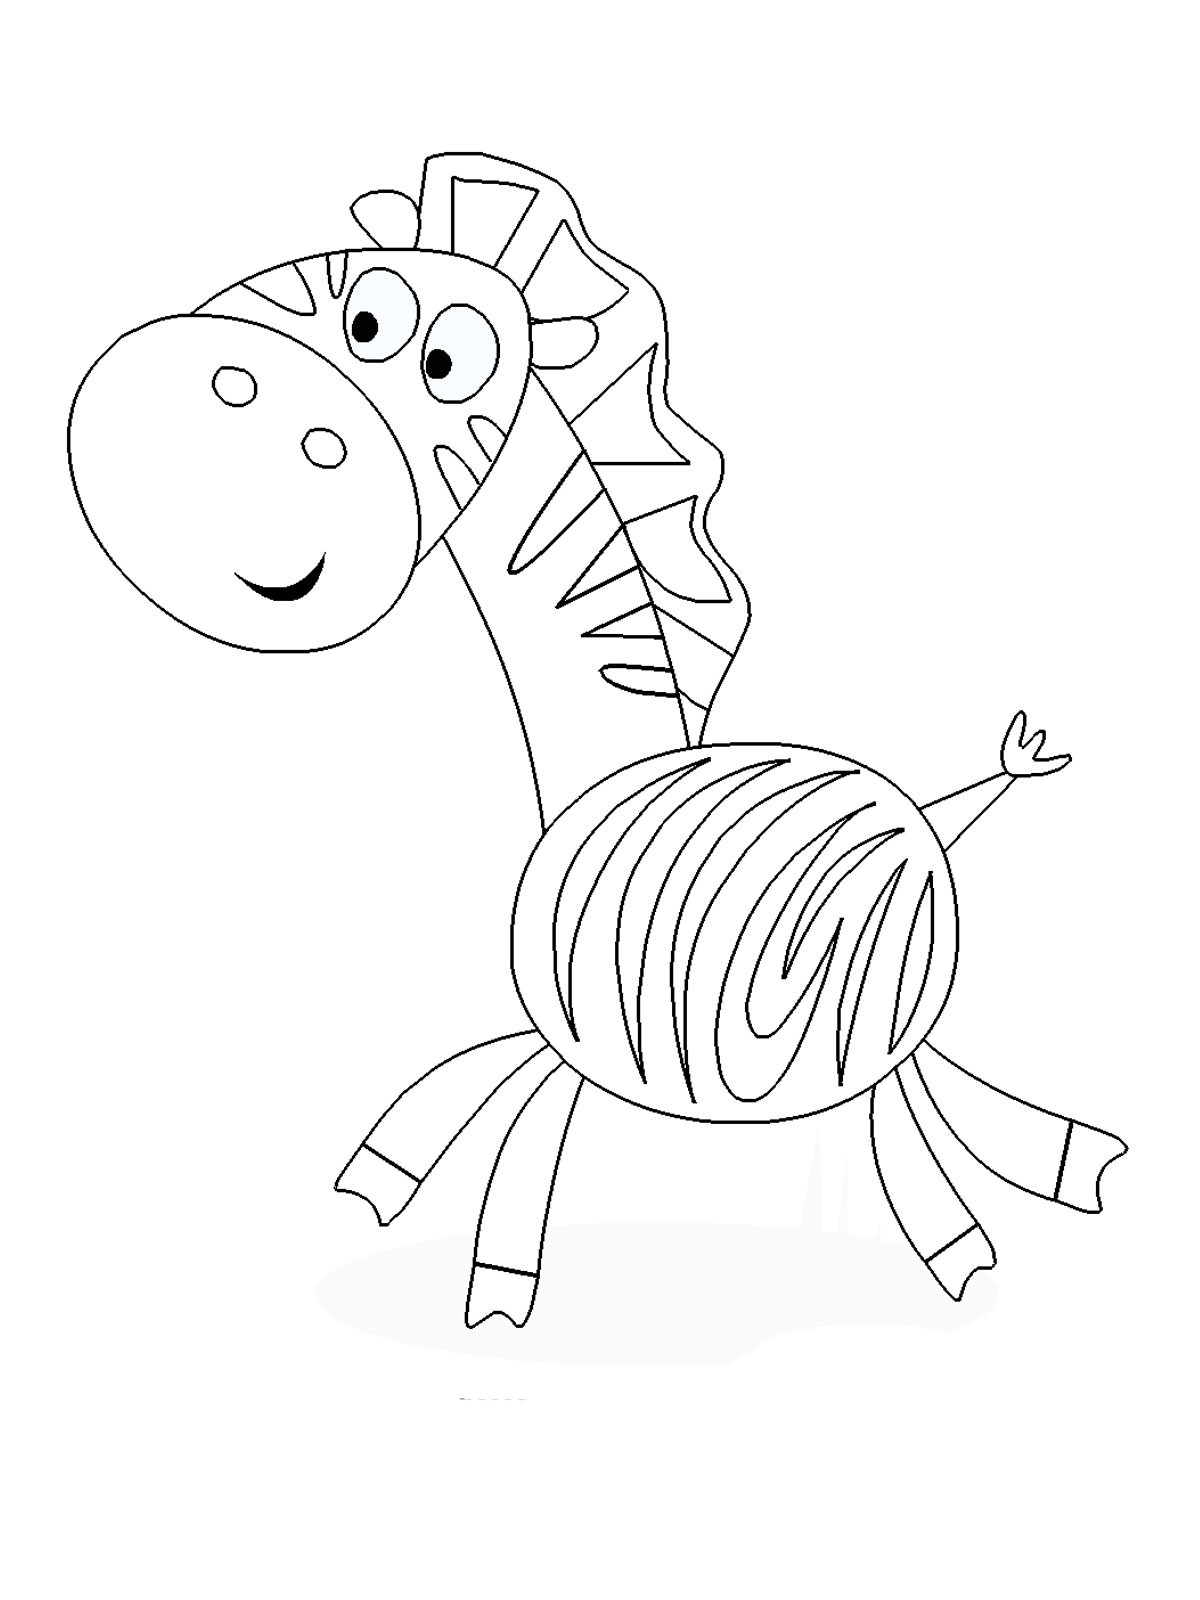 Kids On Line Coloring Pages
 Printable coloring pages for kids